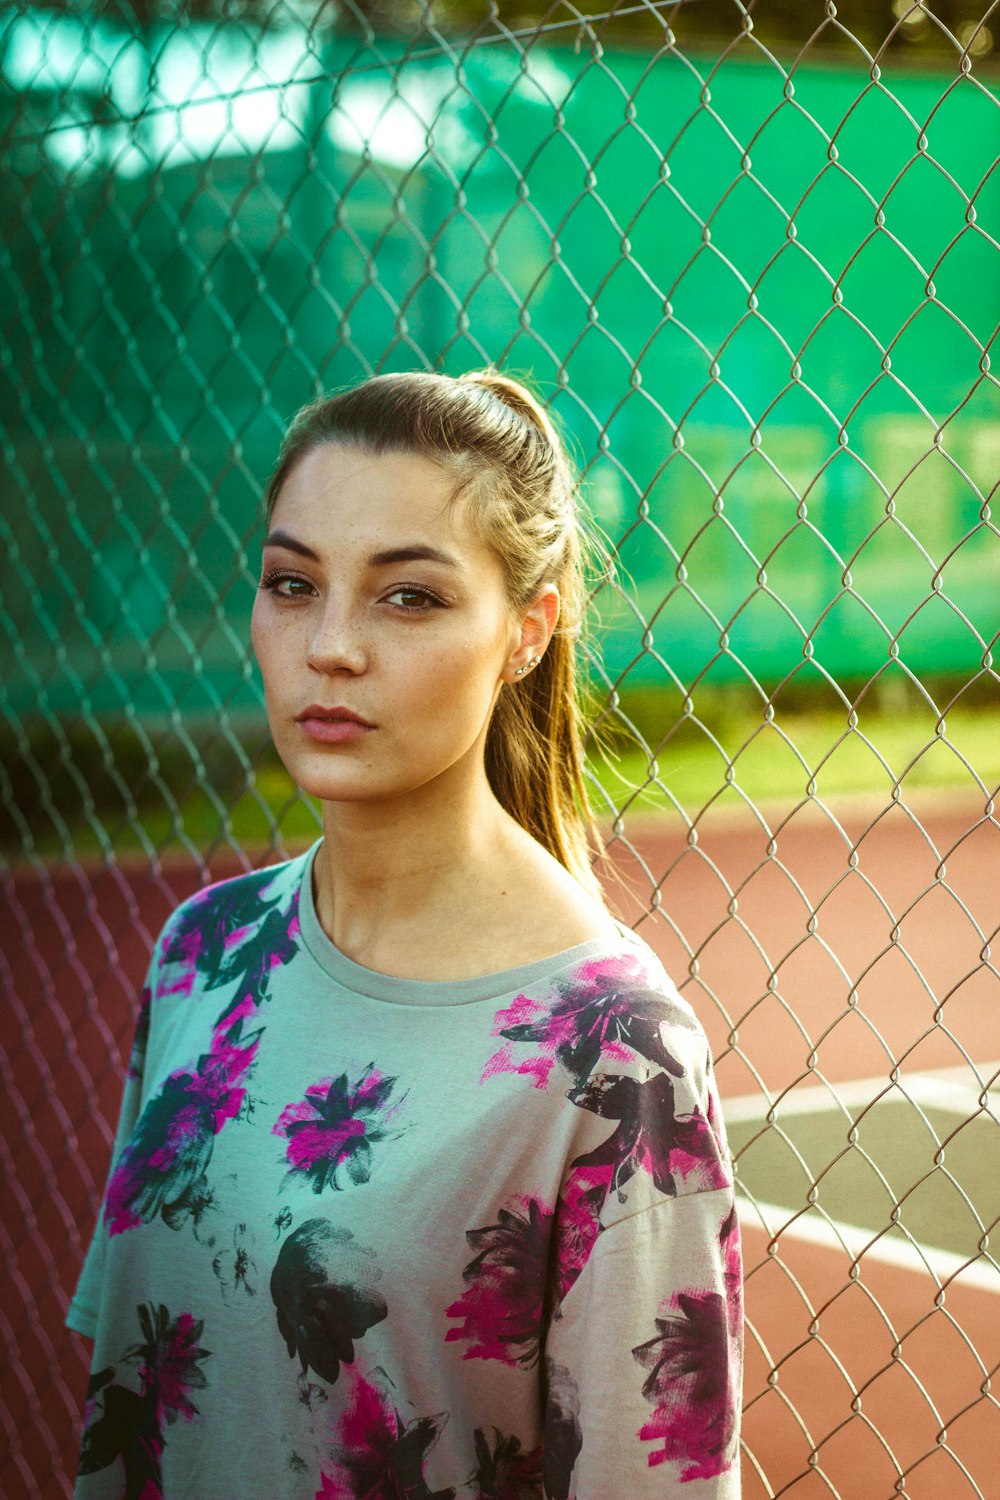 woman wearing floral top beside chain link fence during day